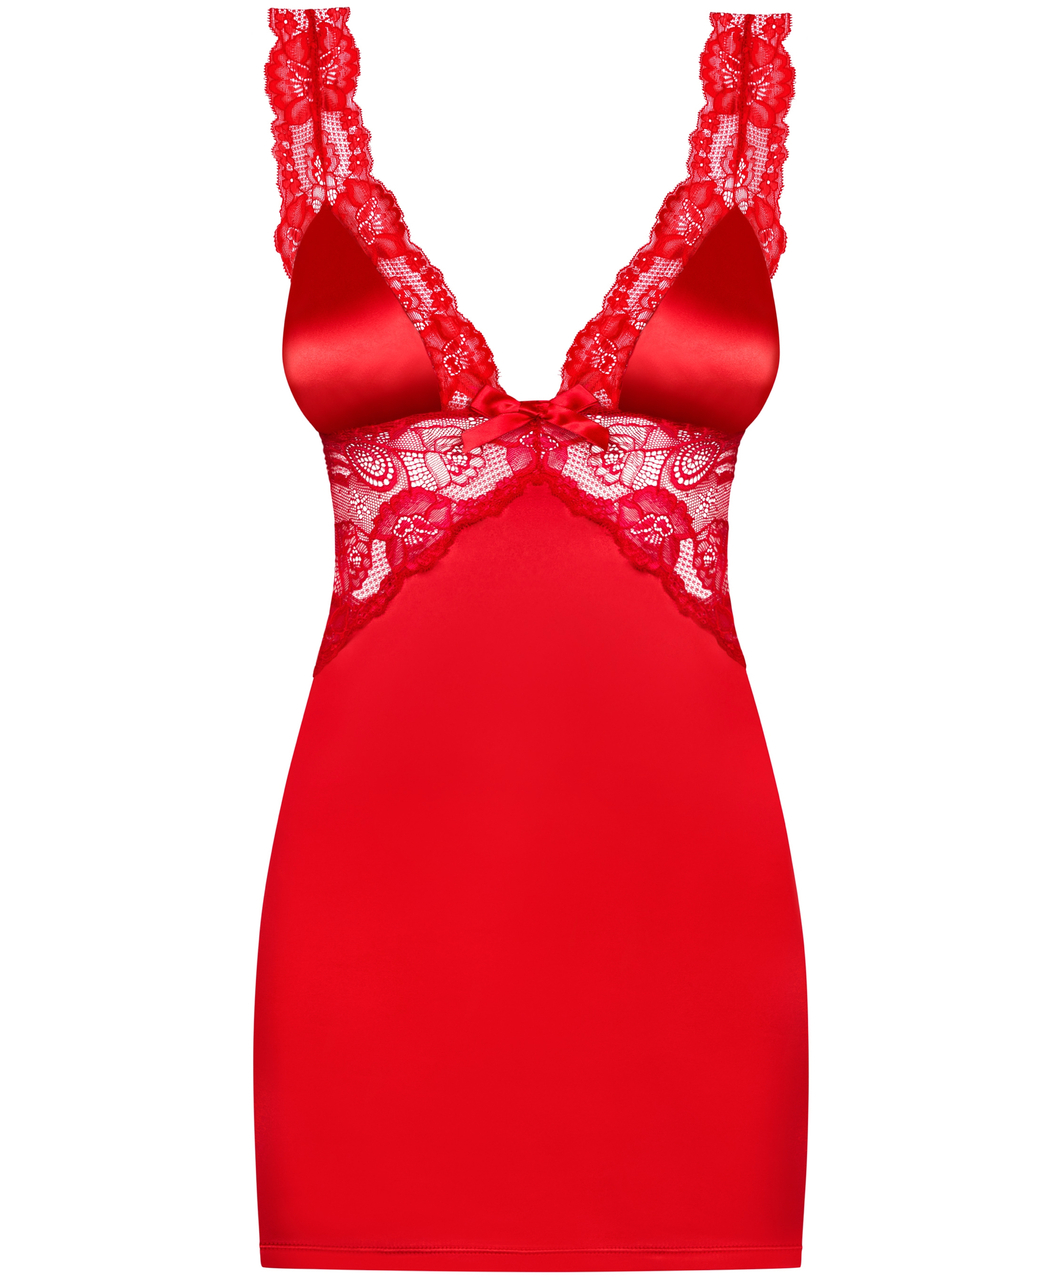 Obsessive red chemise with lace inserts